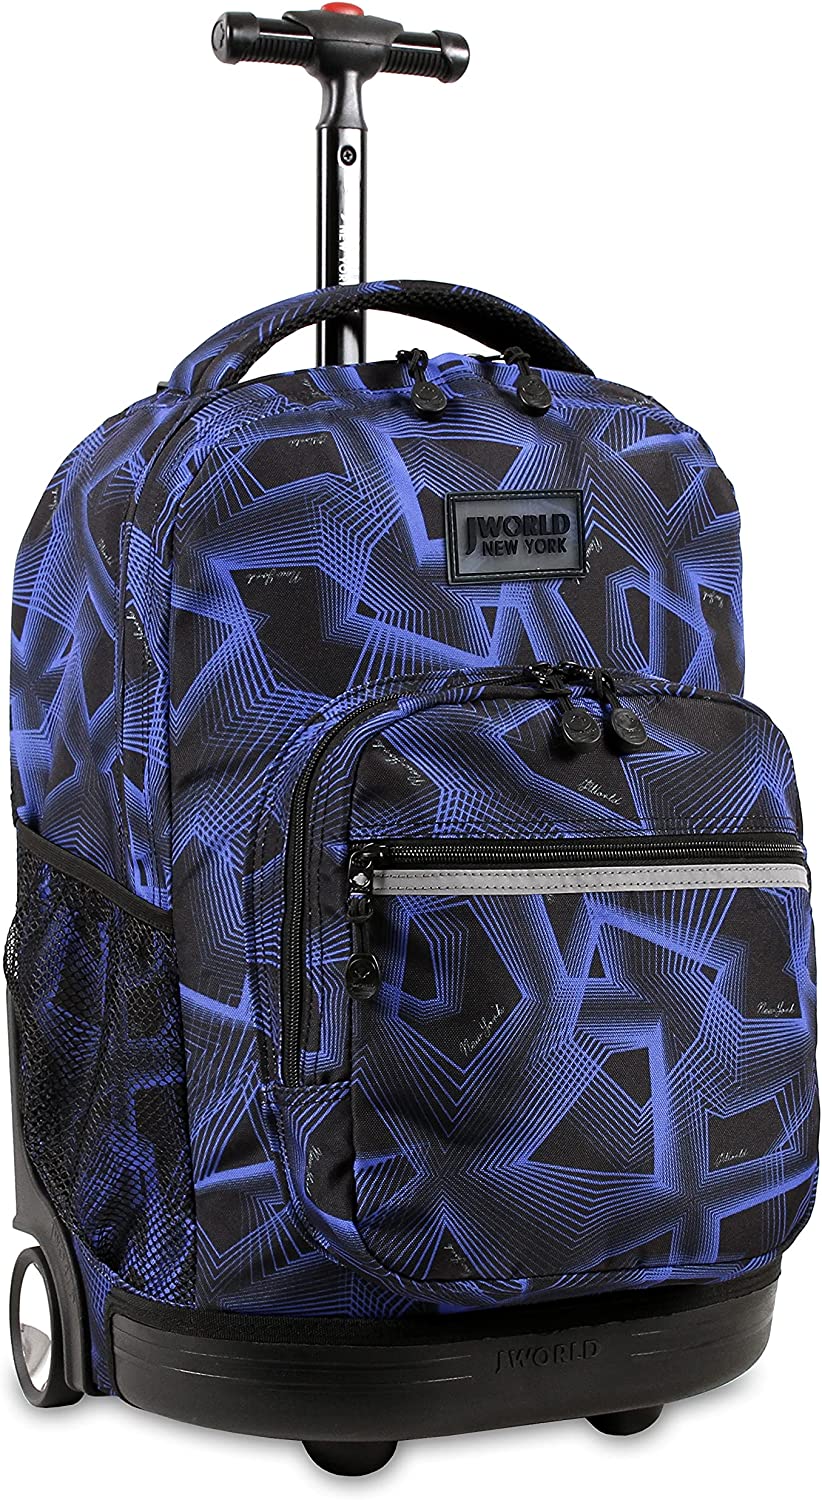 Sunrise Rolling Backpack. Roller Bag with Wheels, Disco, 18